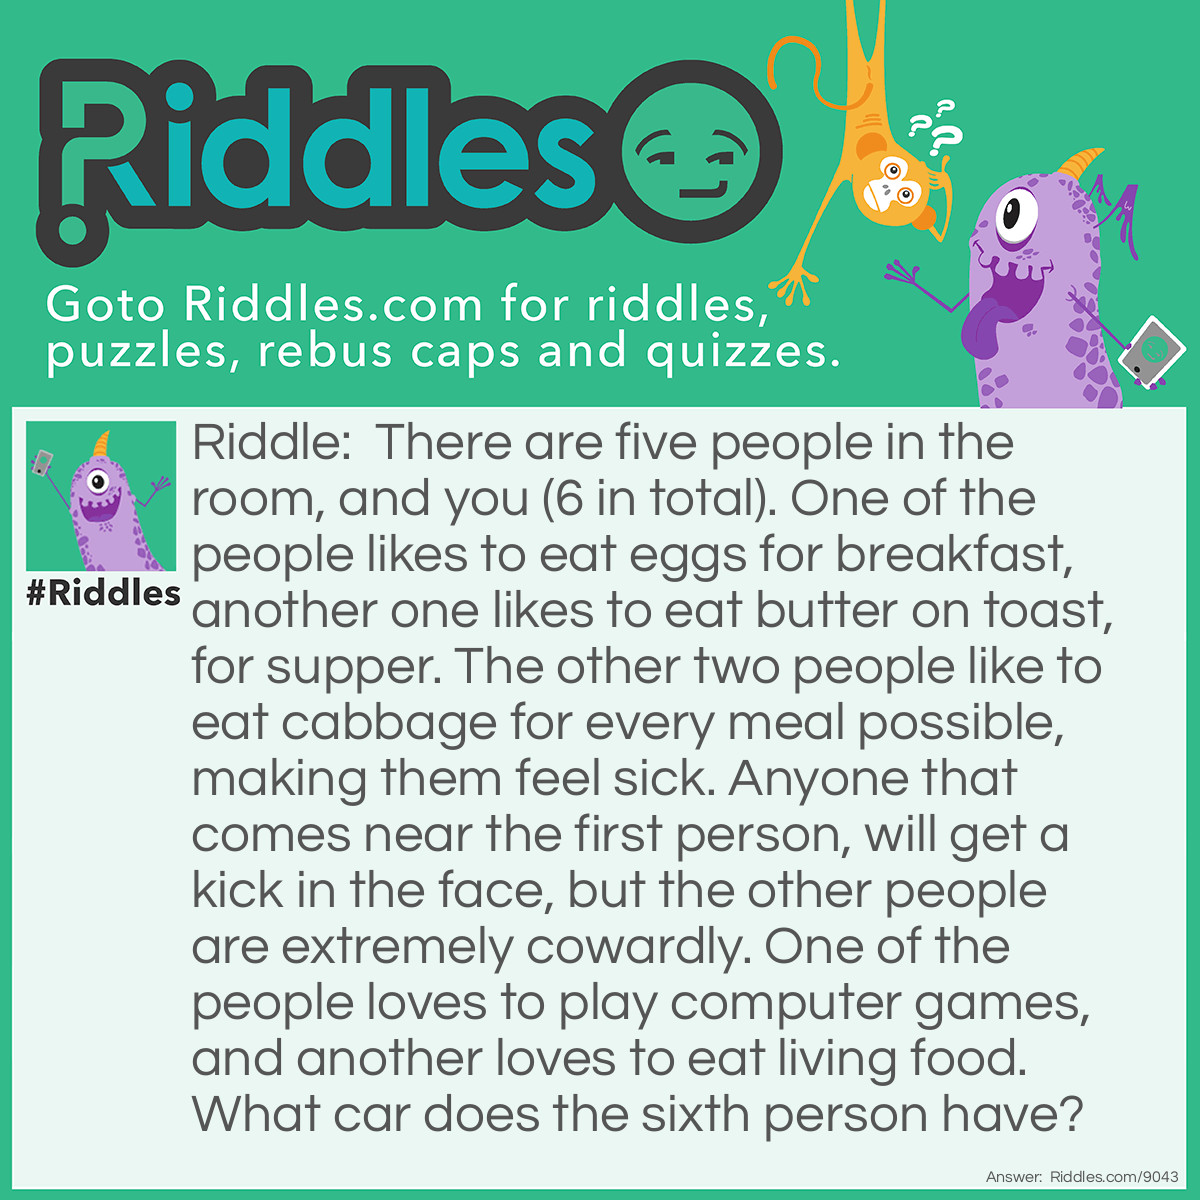 Riddle: There are five people in the room, and you (6 in total). One of the people likes to eat eggs for breakfast, another one likes to eat butter on toast, for supper. The other two people like to eat cabbage for every meal possible, making them feel sick. Anyone that comes near the first person, will get a kick in the face, but the other people are extremely cowardly. One of the people loves to play computer games, and another loves to eat living food. What car does the sixth person have? Answer: What car do you have? That's the answer!